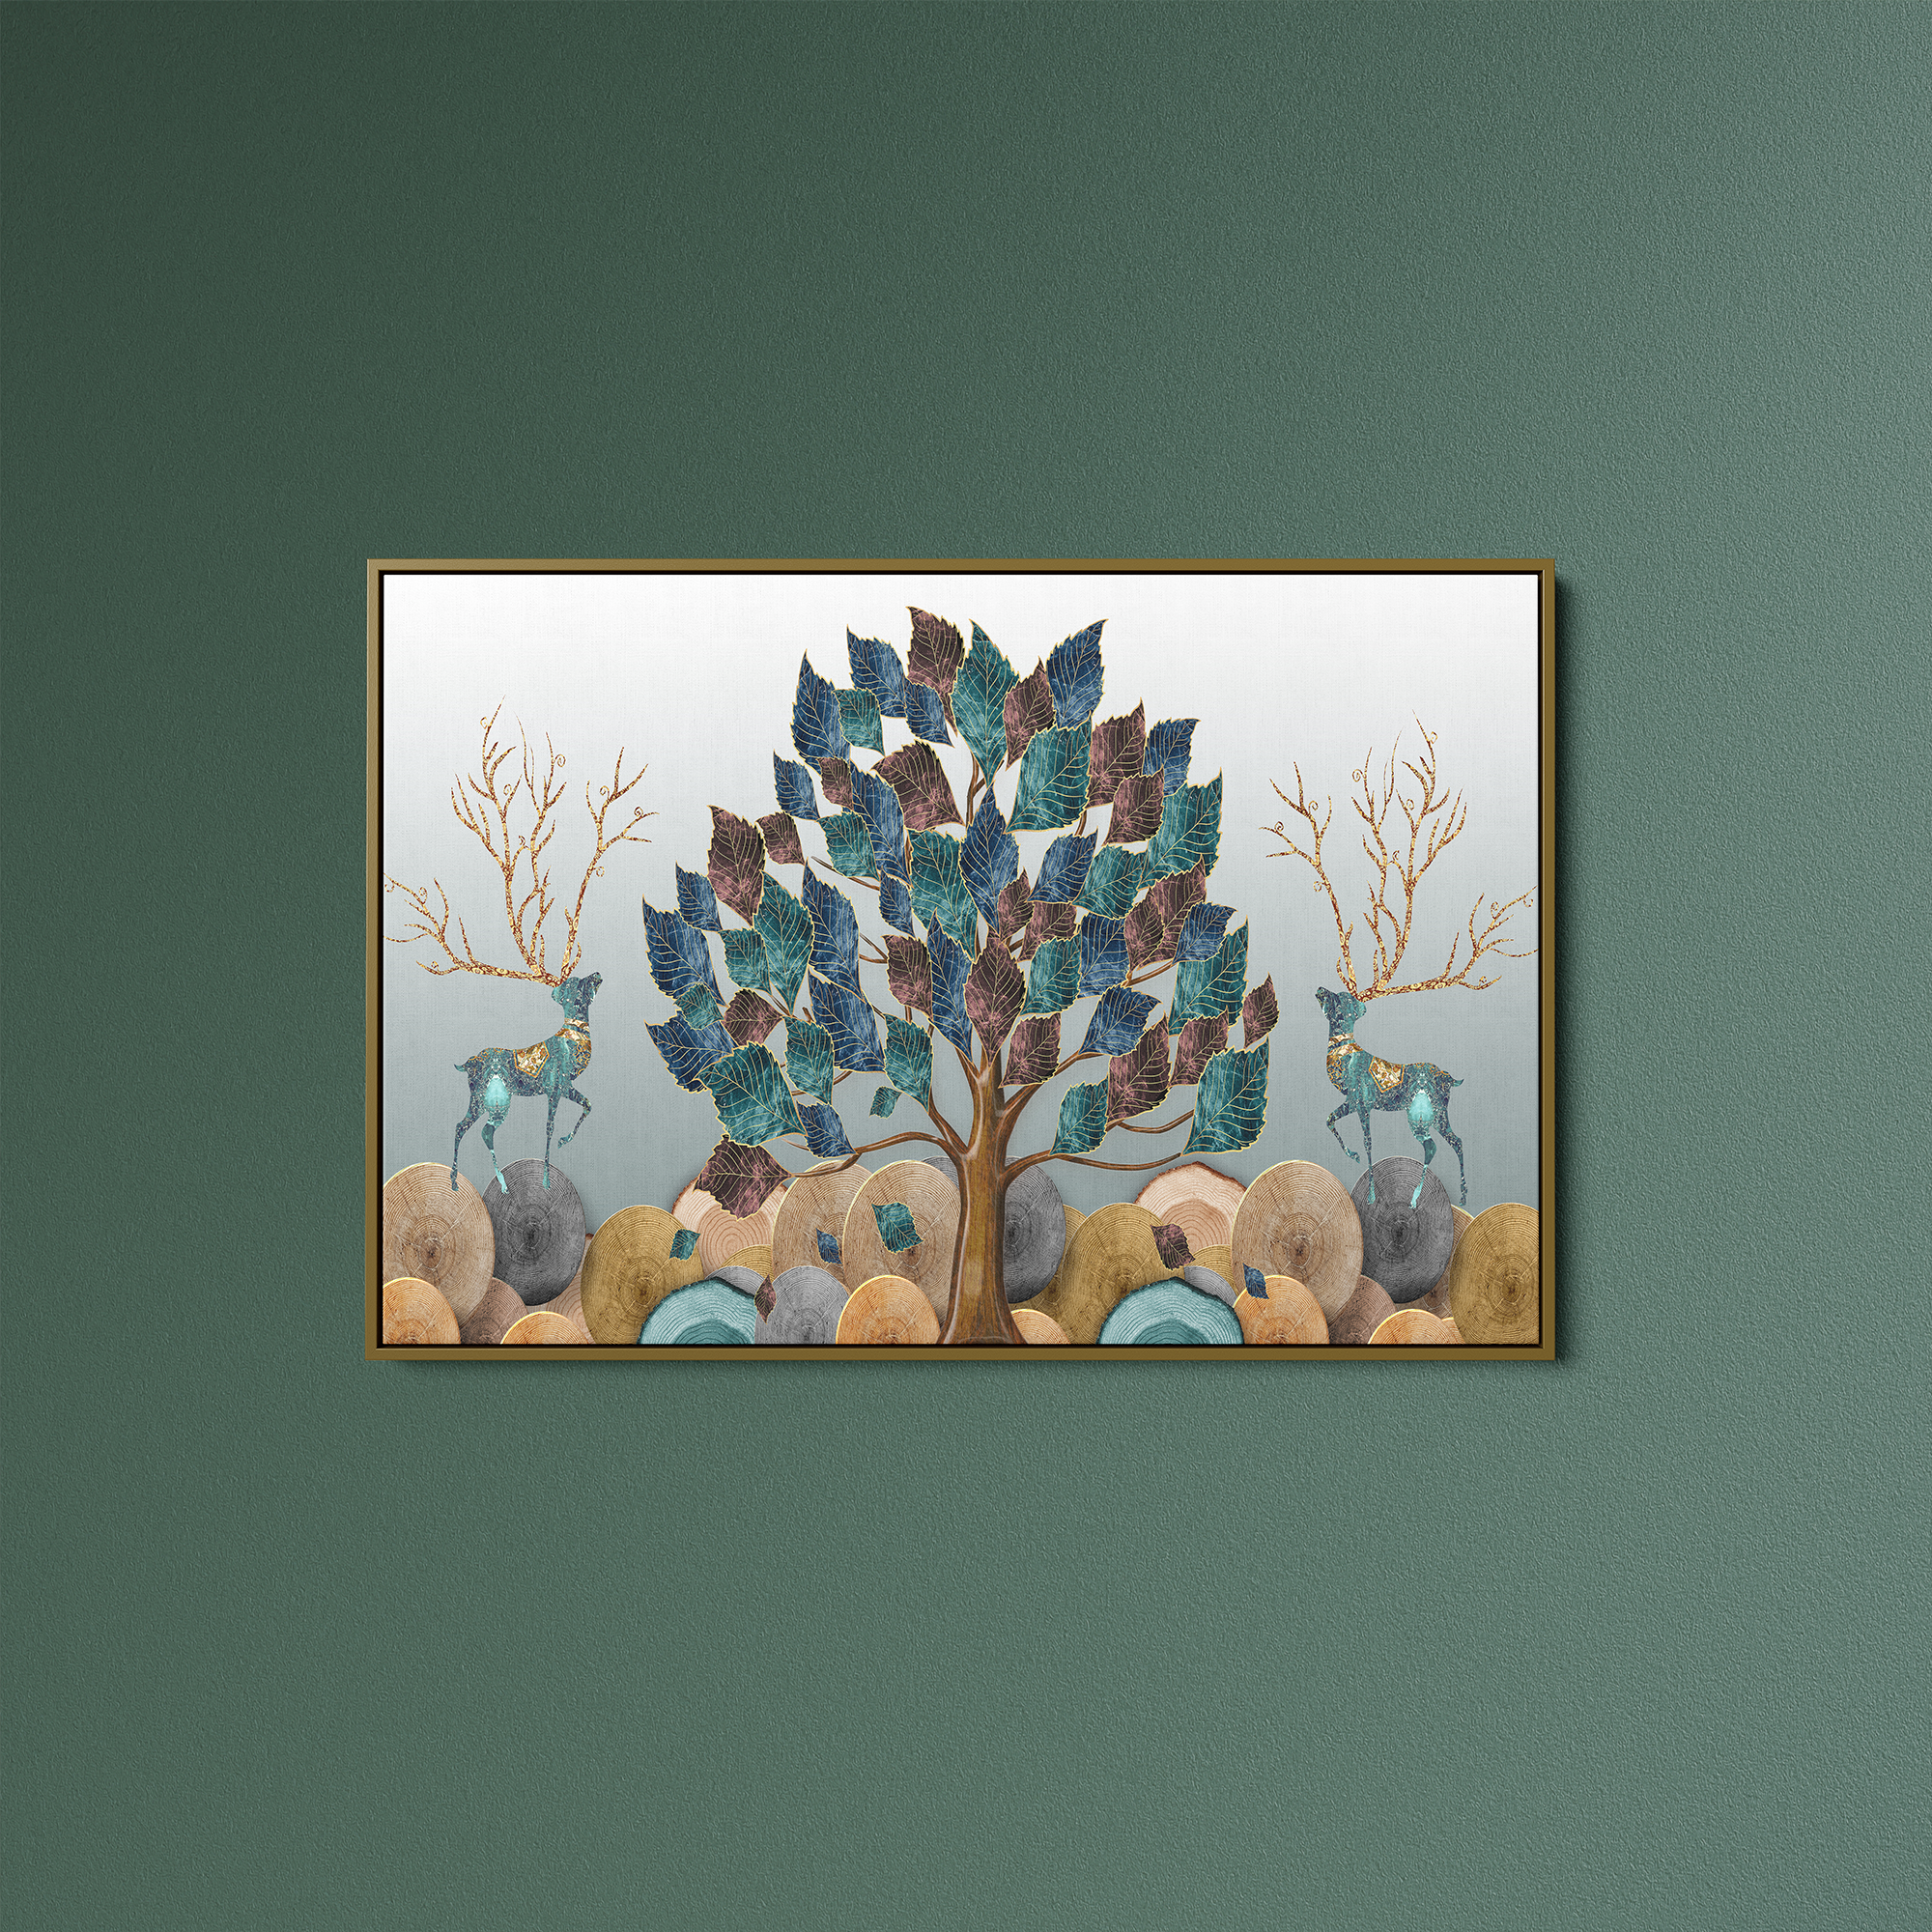 Morden Art Tree Mural Canvas Wall Painting